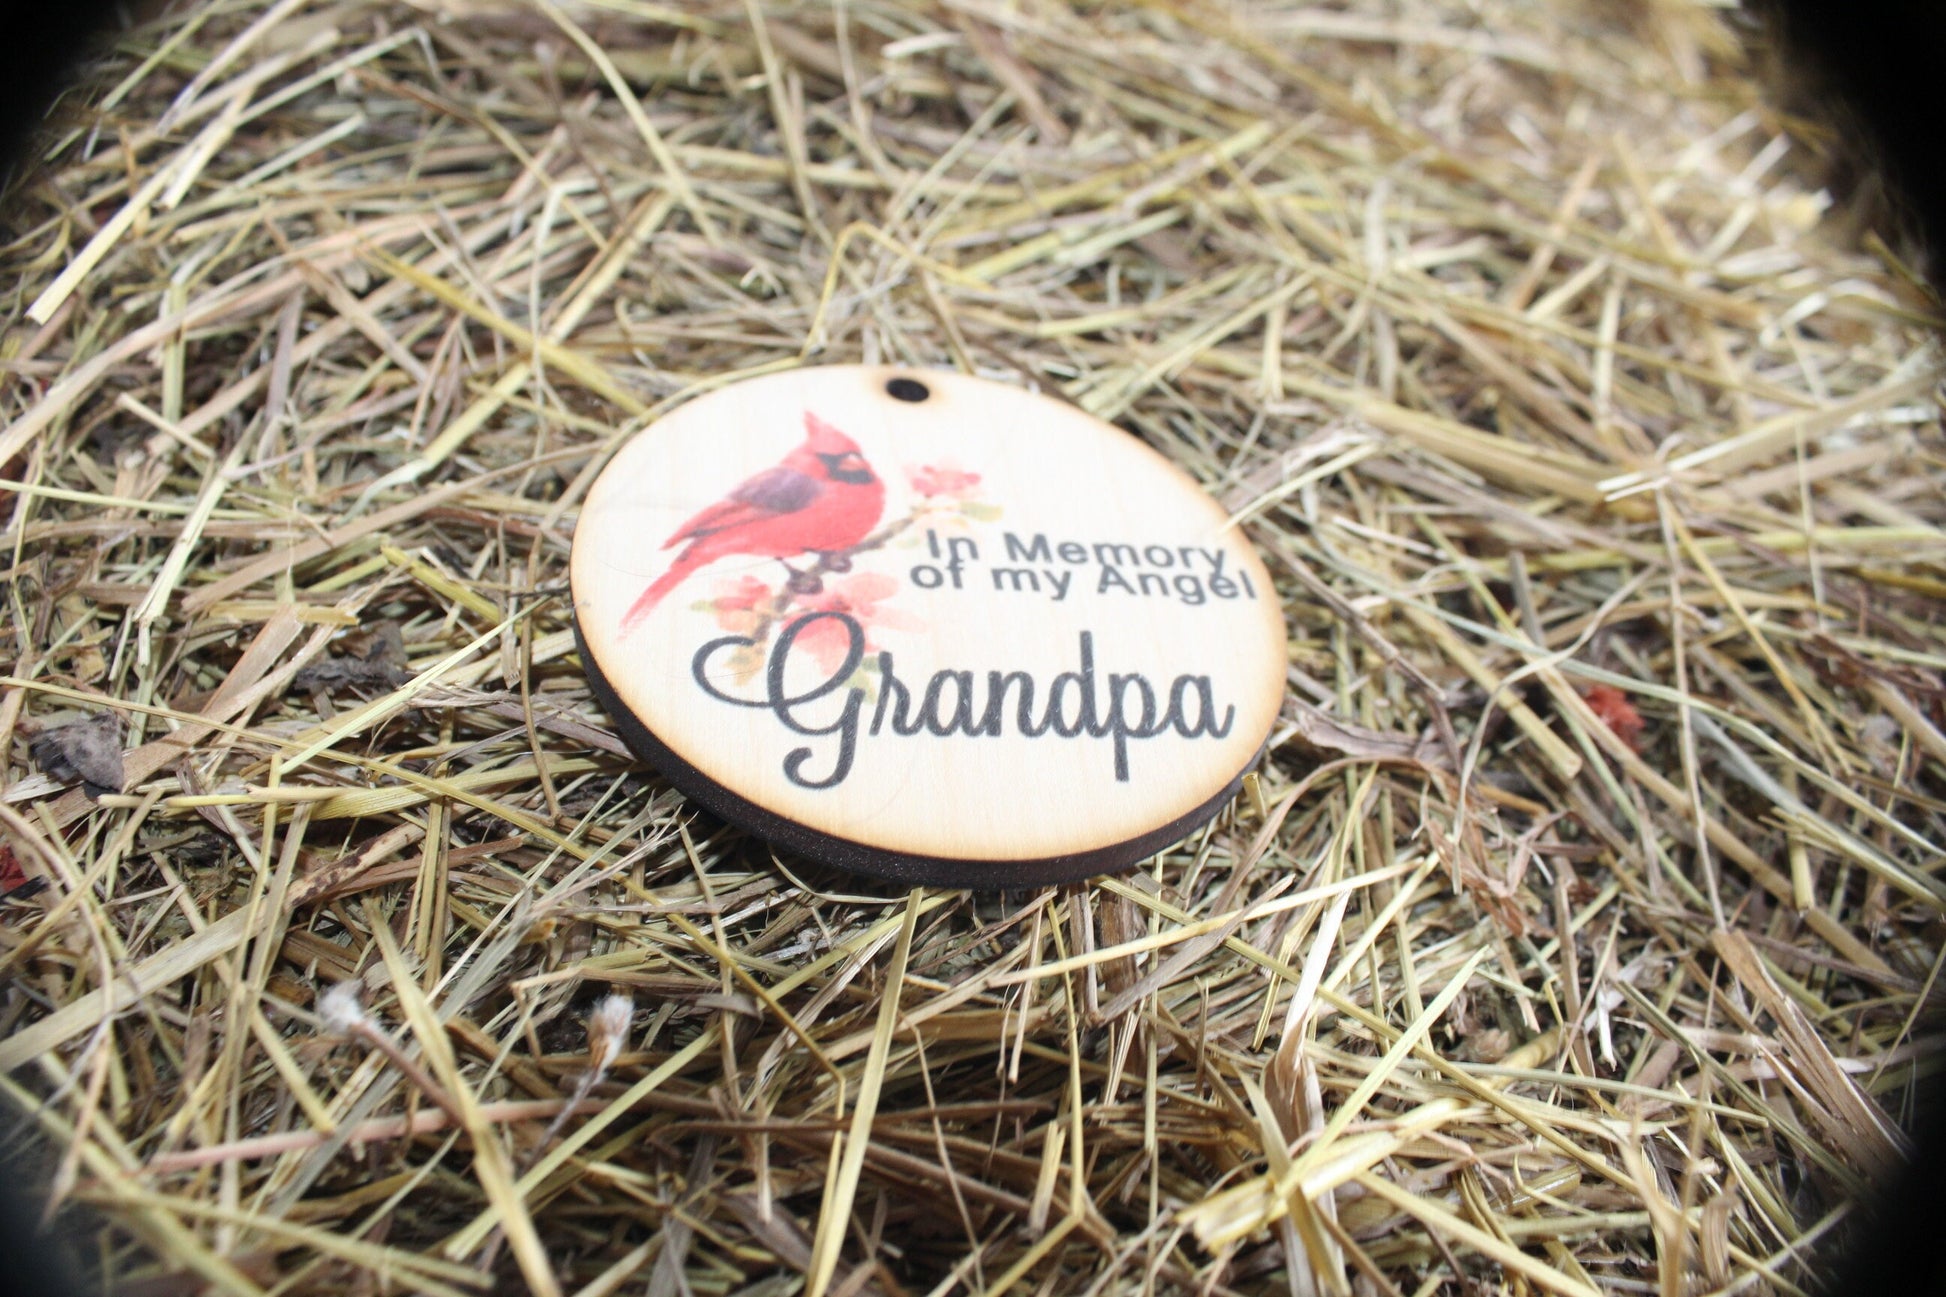 In Memory Of My Angel Grandpa Cardnial In Rememberance Memorial Christmas Holiday Ornament Woodslice Keychain Gift Tag Round